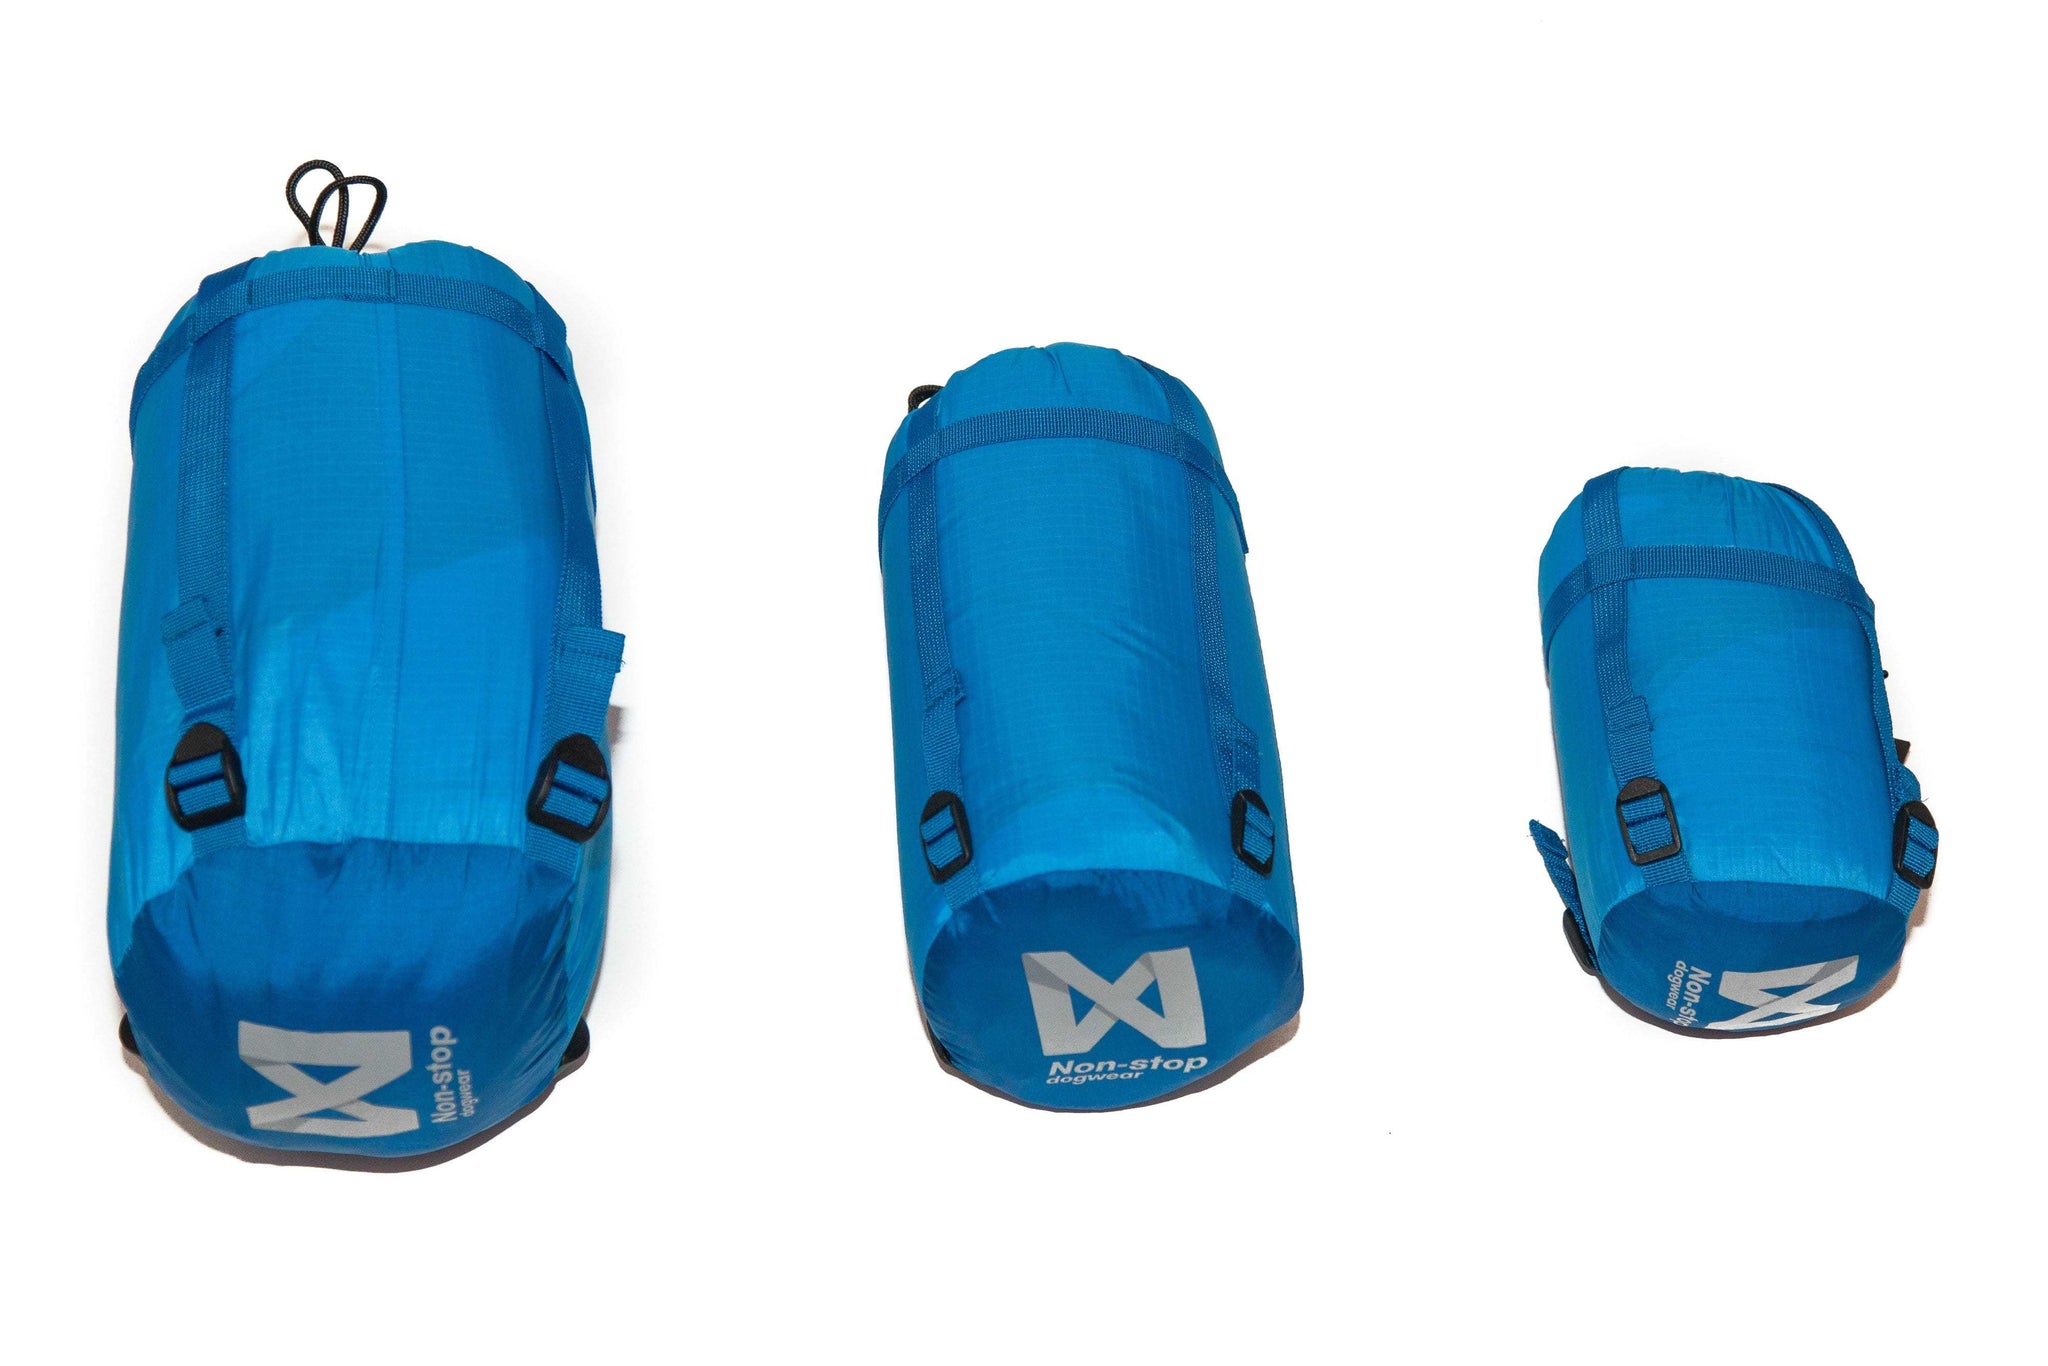 Three sizes of Ly Sleeping Bag for dogs